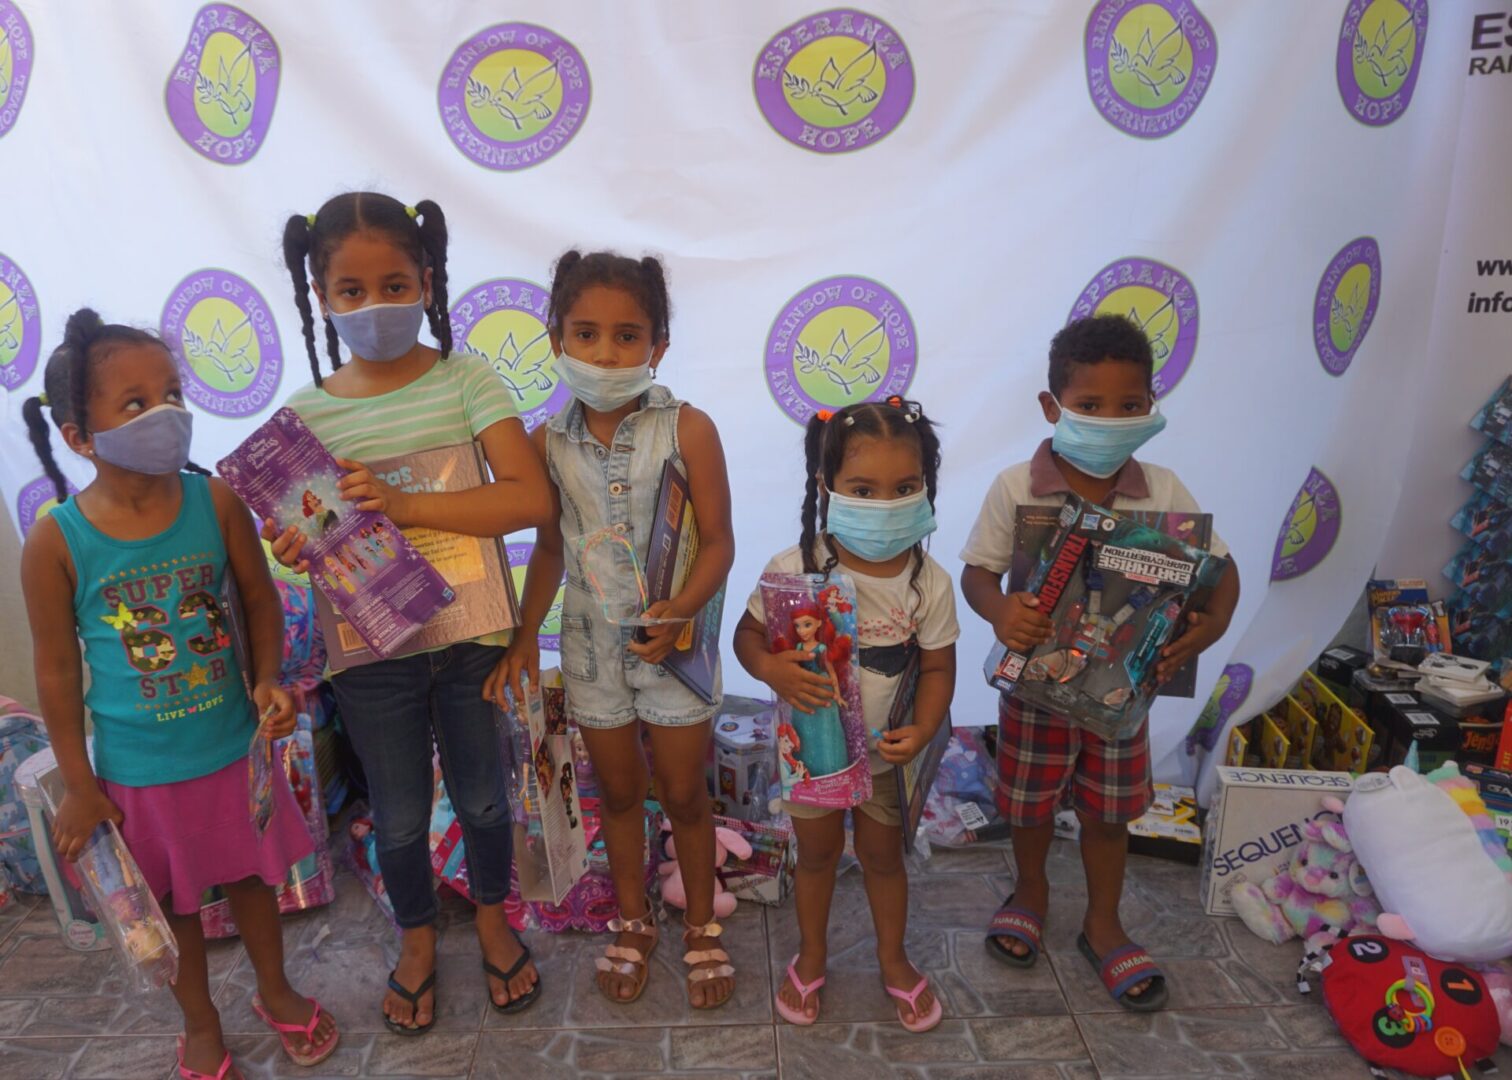 Five children standing against the Esperanza-Hope backdrop with their toys and books, batch 6